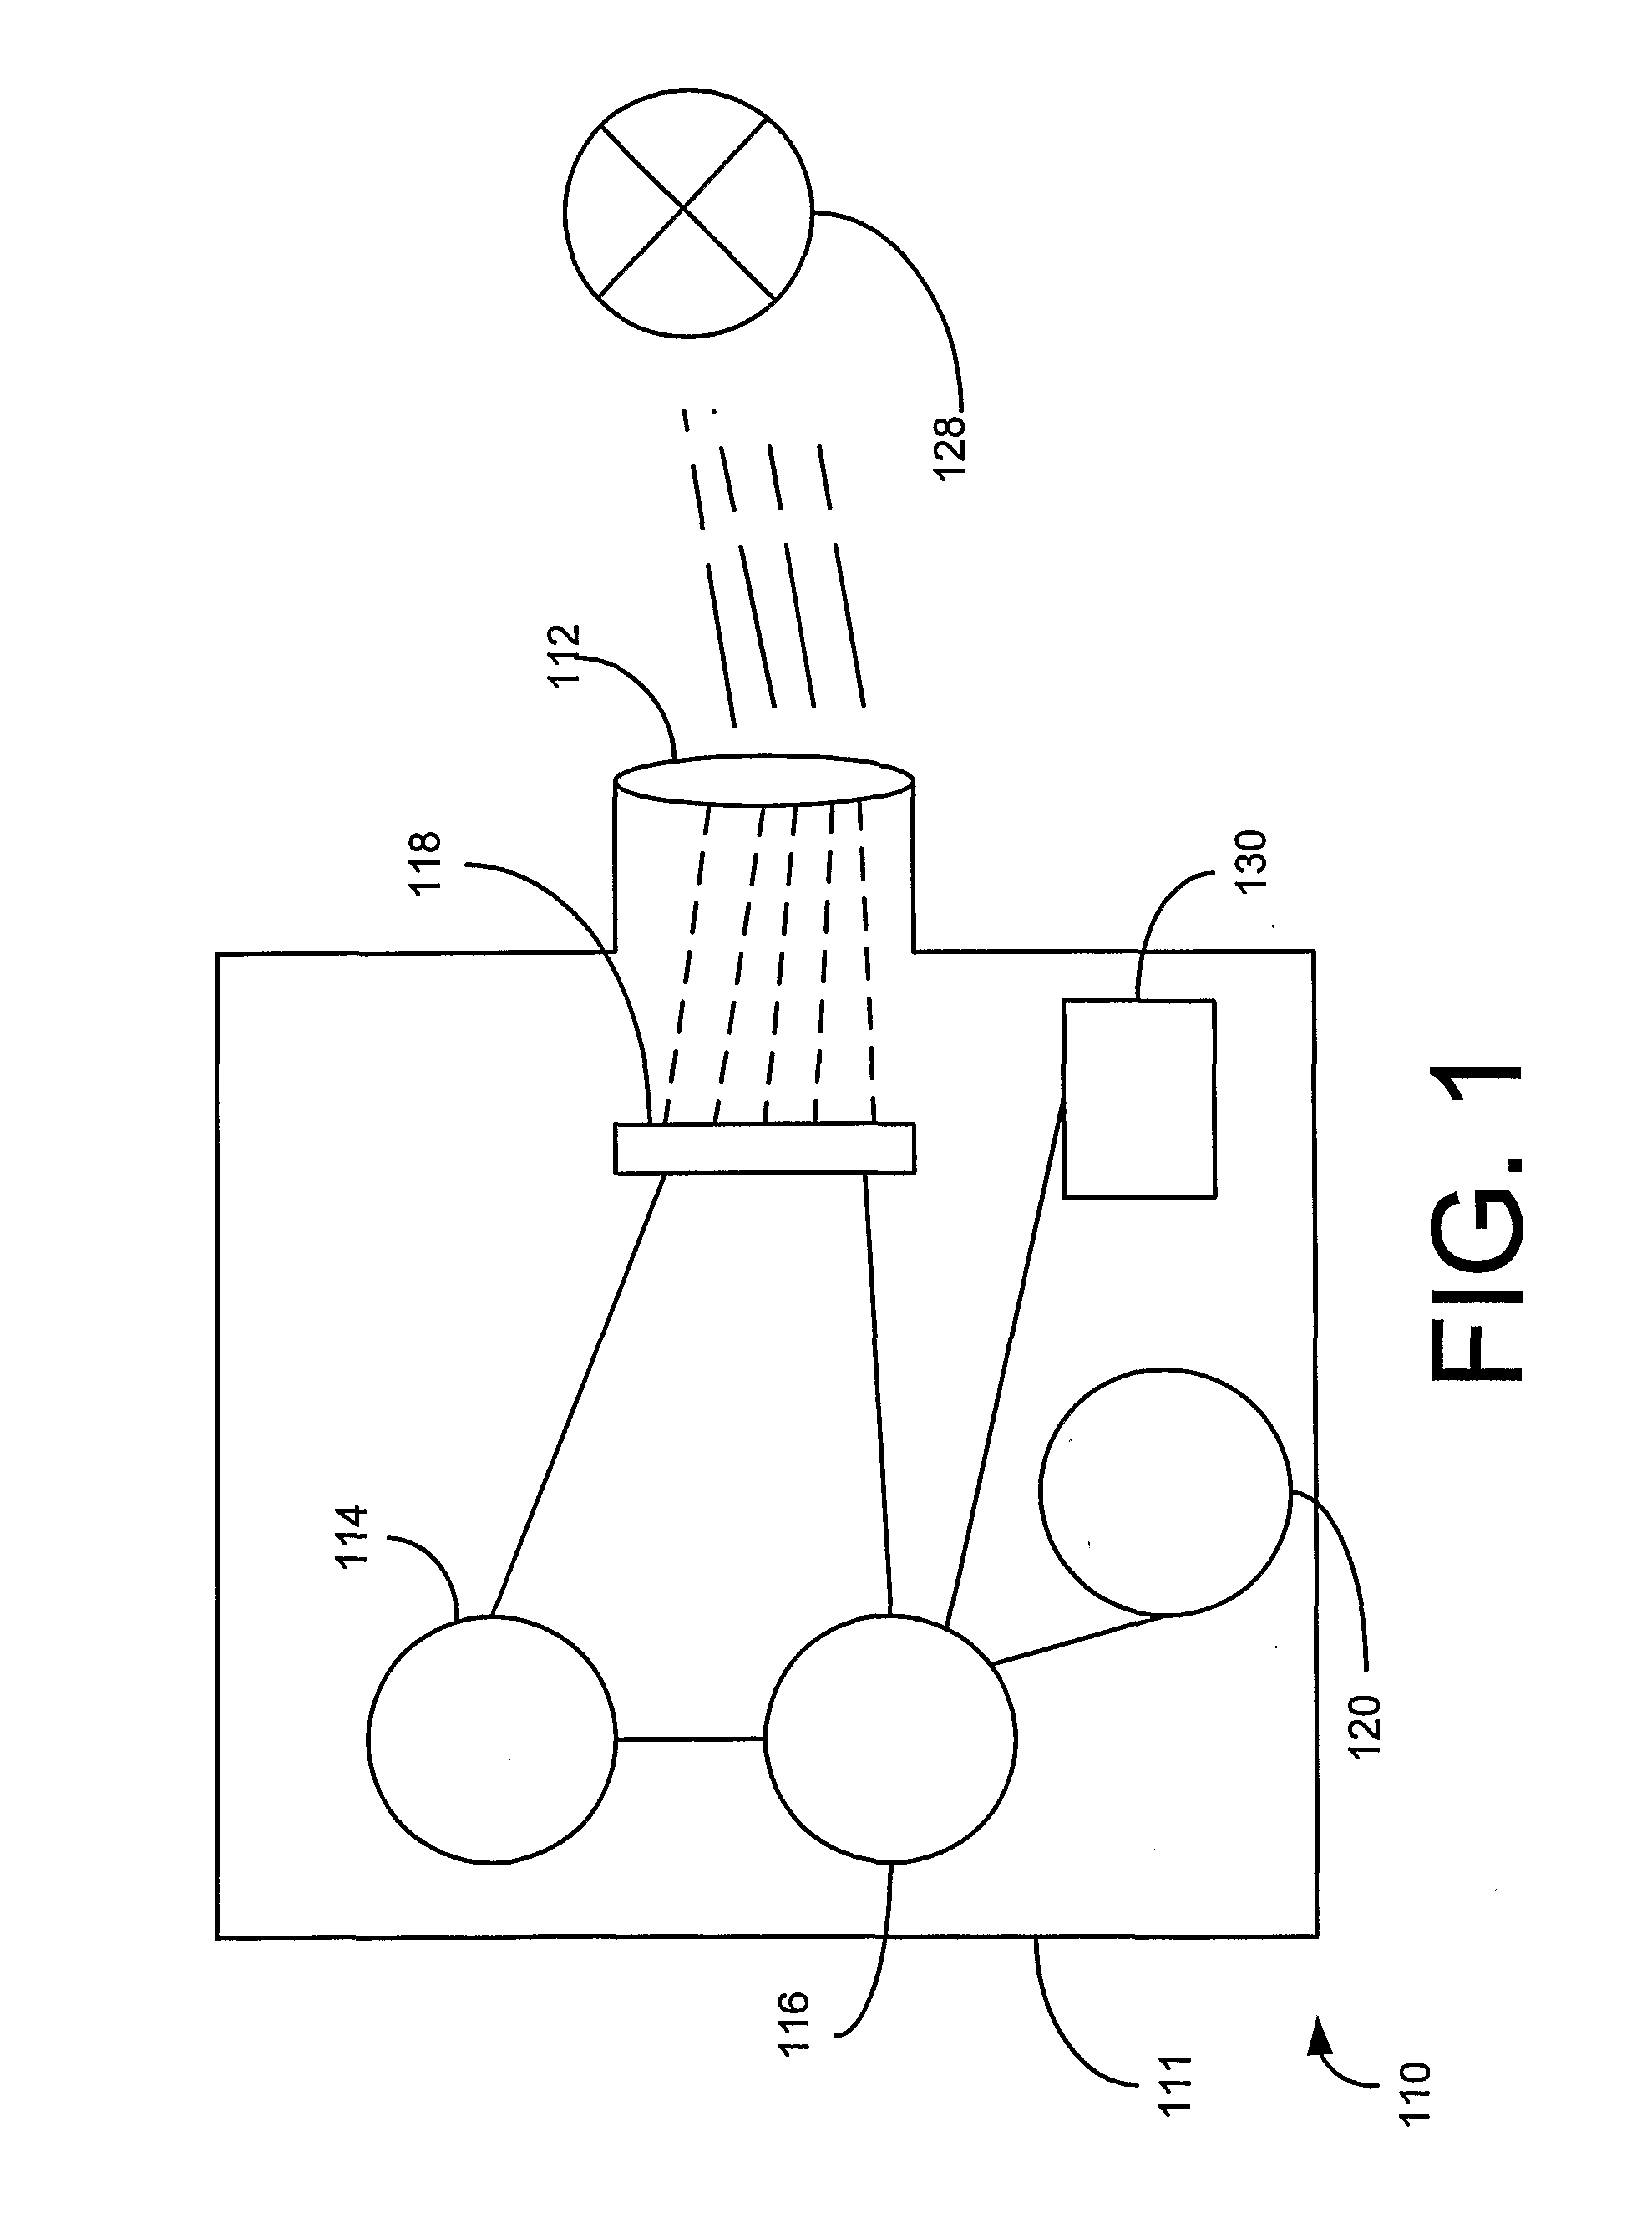 System and method for implementation motion-driven multi-shot image stabilization